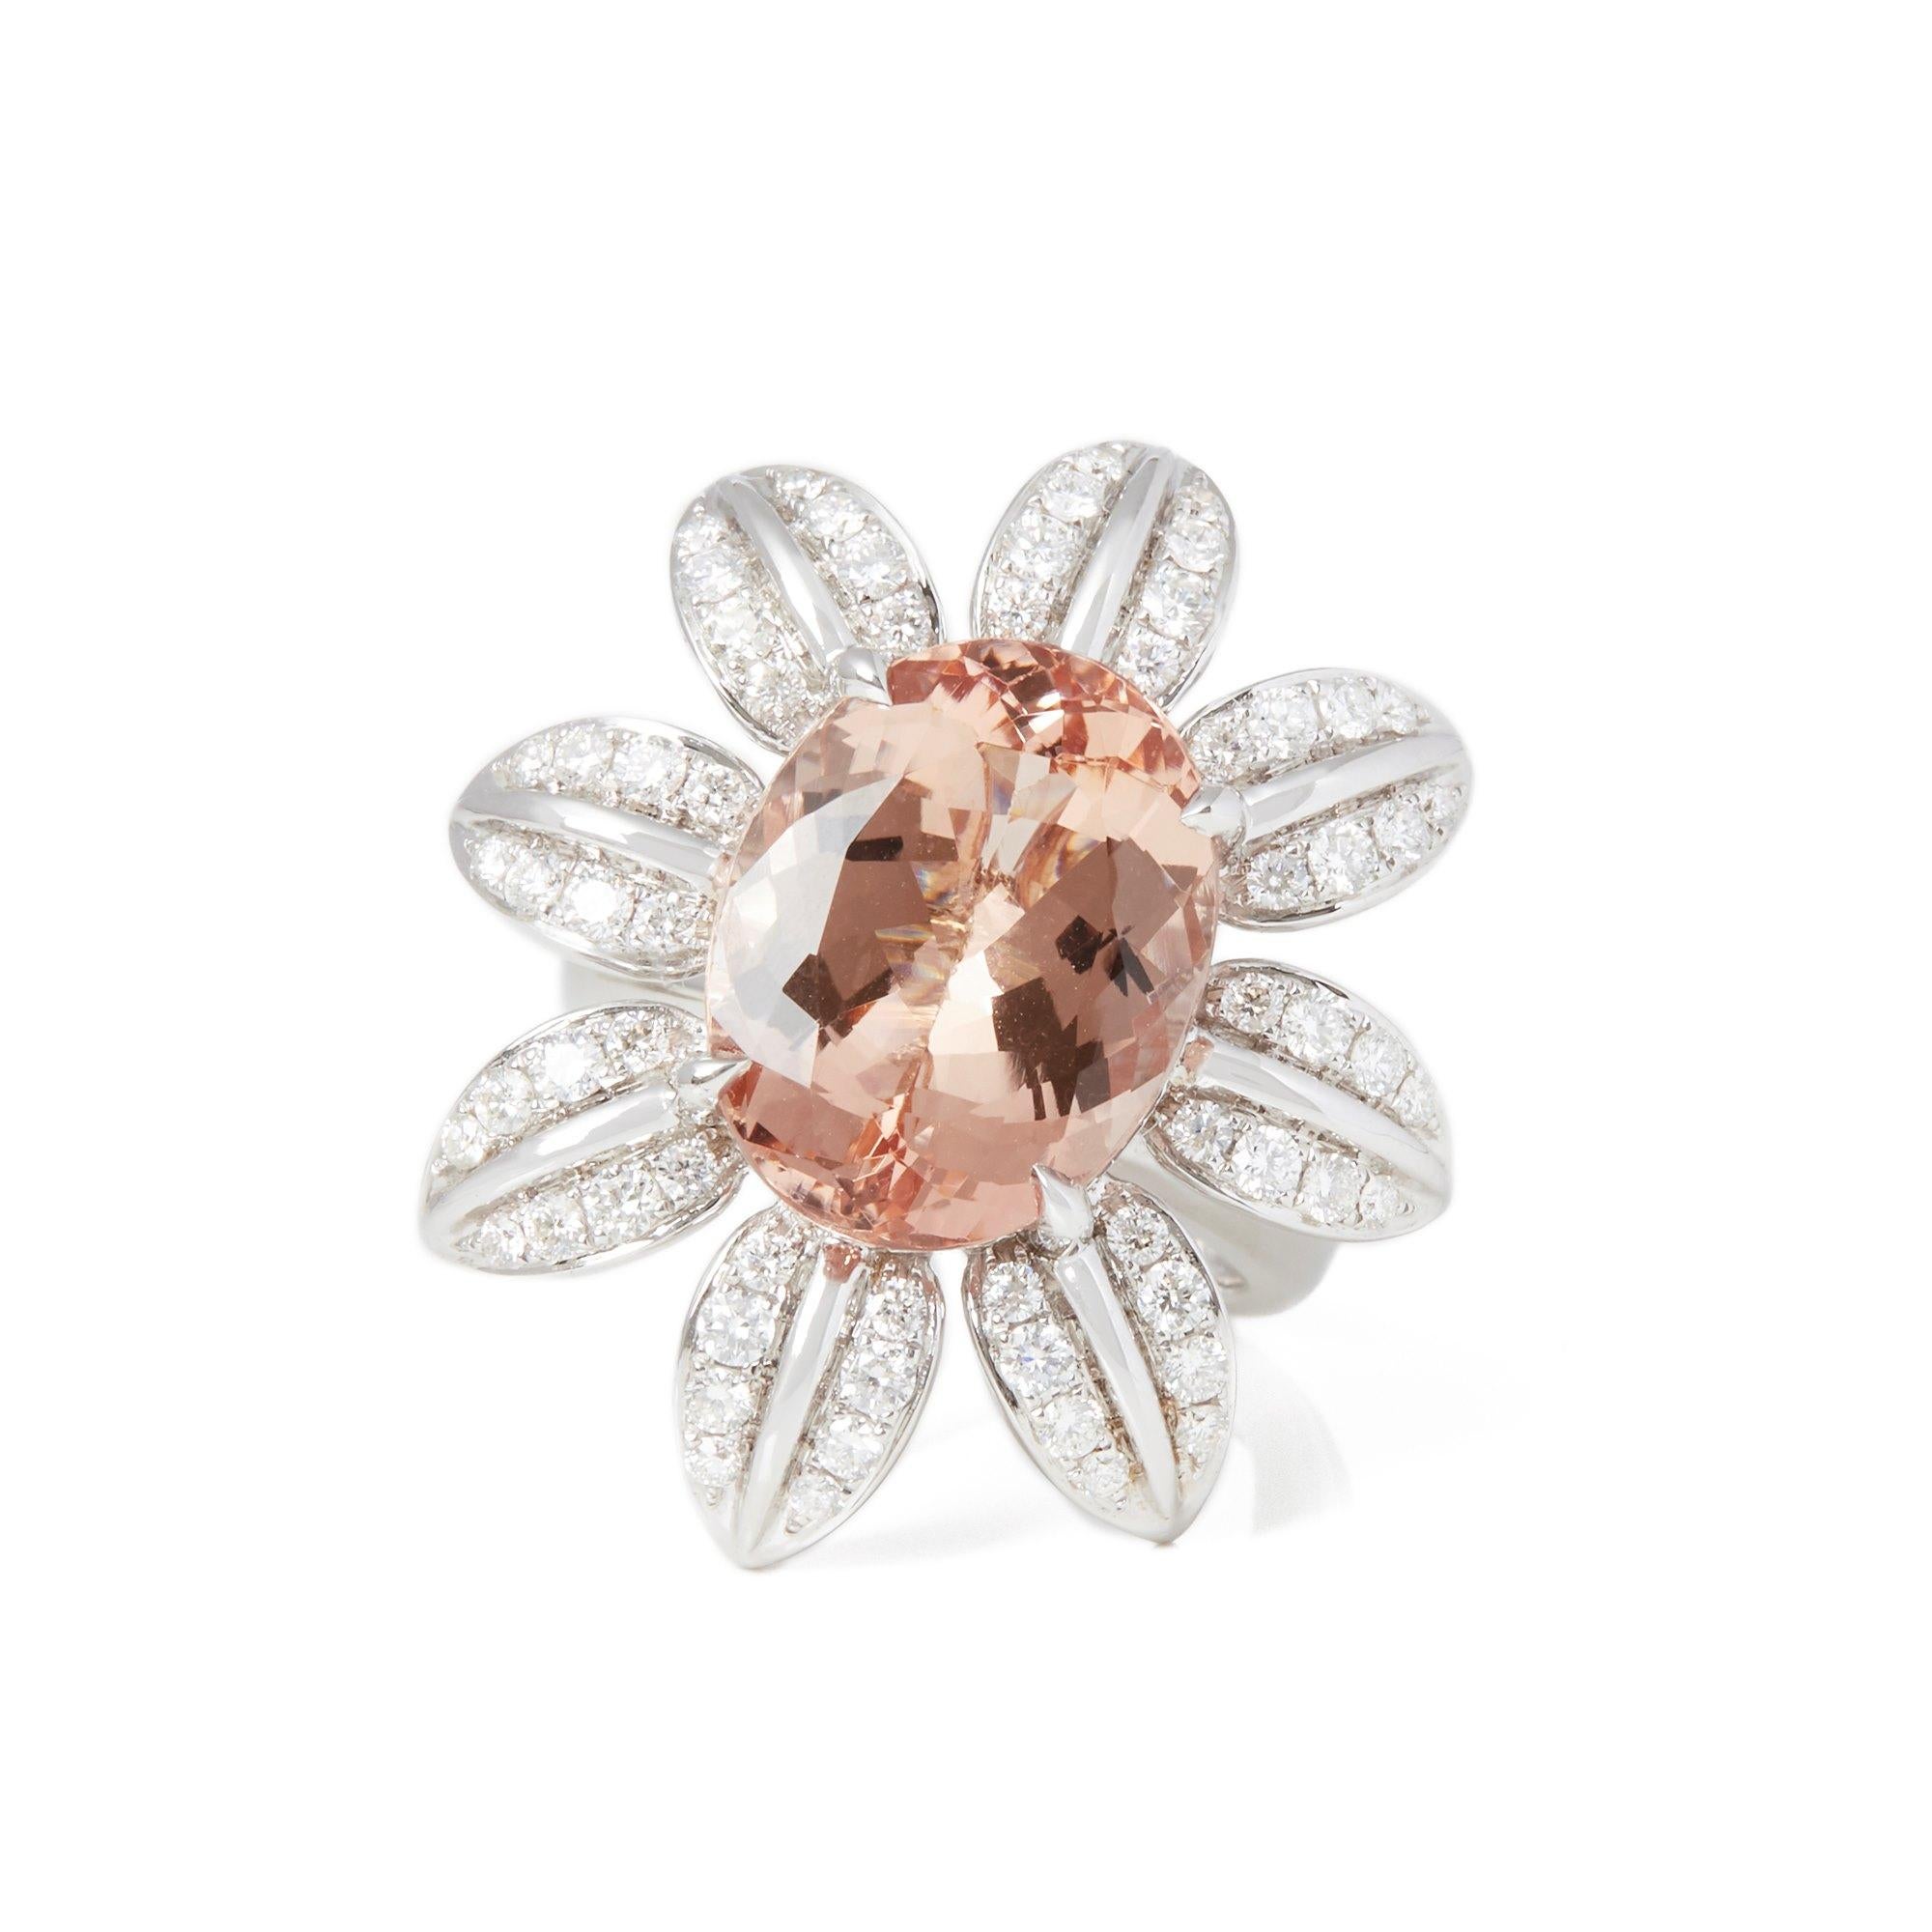 This ring designed by David Jerome is from his private collection and features one oval cut morganite totalling 8.86cts sourced in Brazil. Set with round brilliant cut Diamonds totalling 1.20cts mounted in an 18k white gold setting. Finger size UK